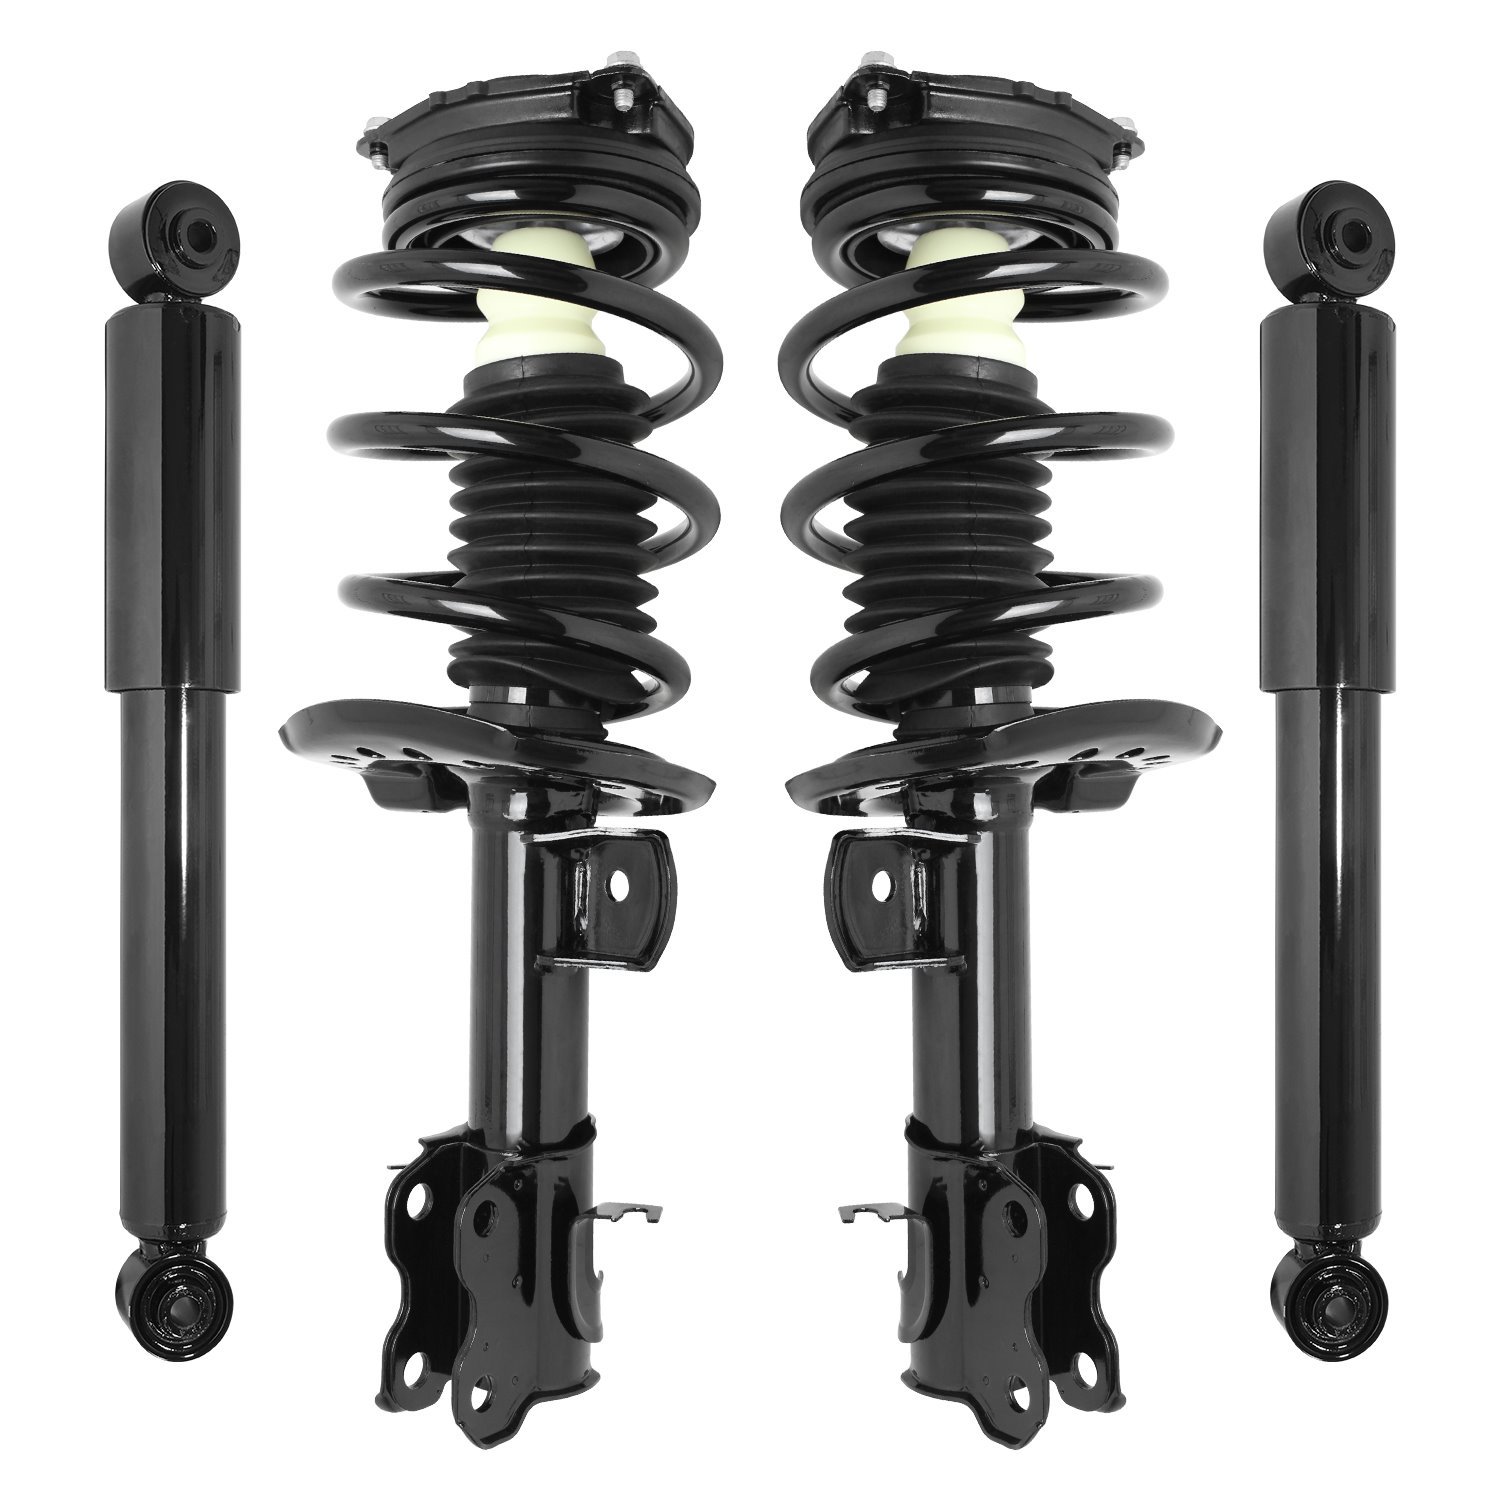 4-11785-255160-001 Front & Rear Suspension Strut & Coil Spring Assembly Fits Select GM